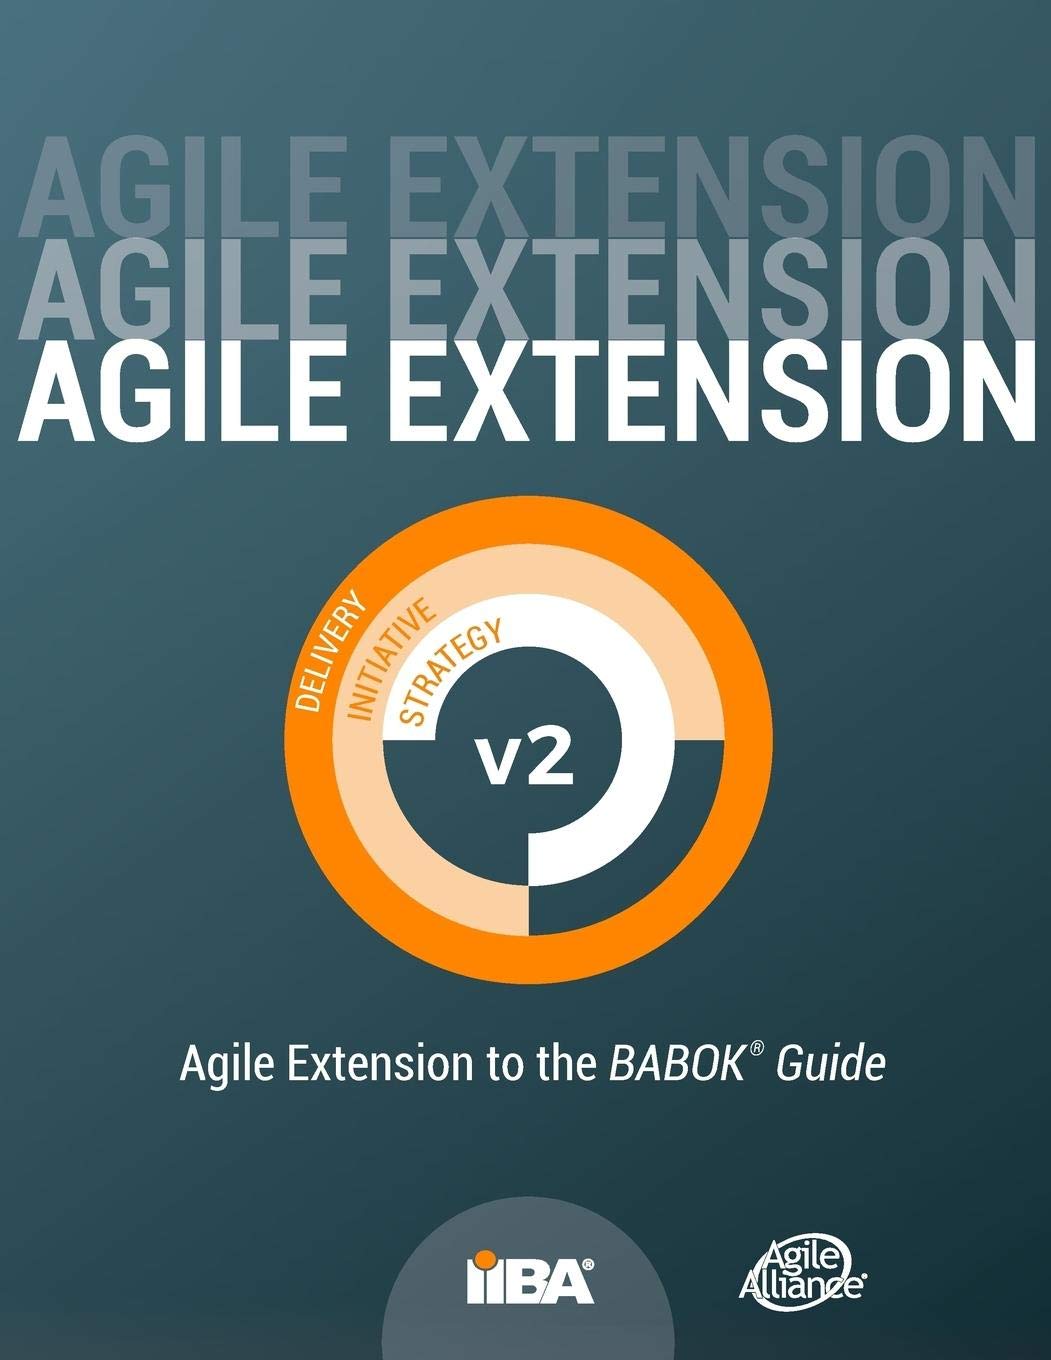 The Agile Extension to the BABOK Guide.